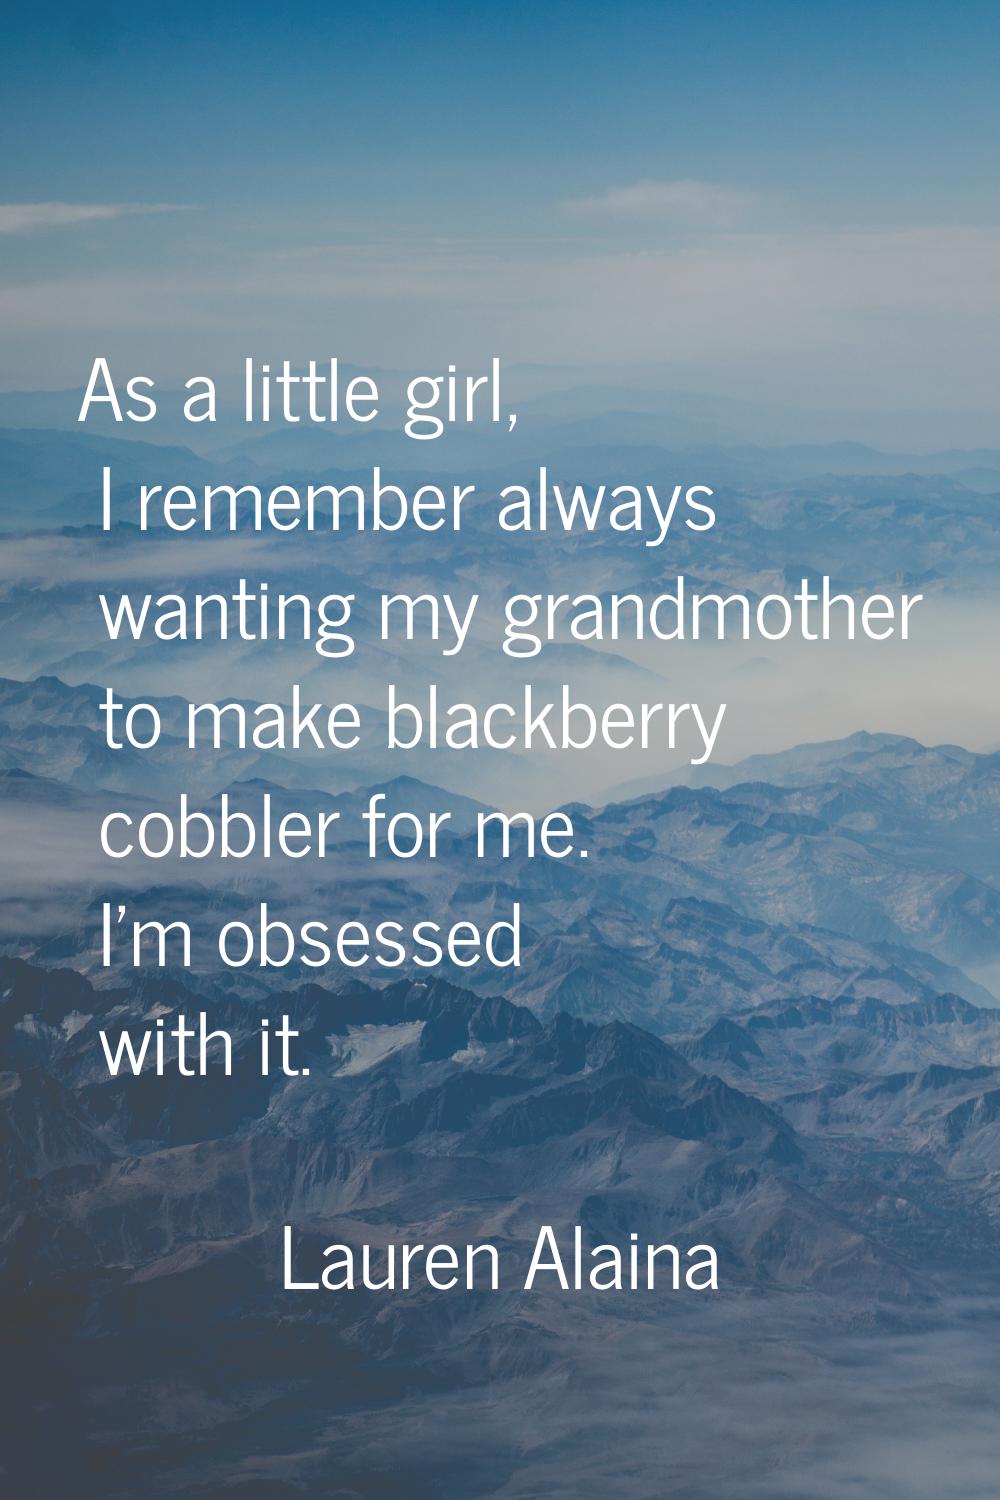 As a little girl, I remember always wanting my grandmother to make blackberry cobbler for me. I'm o